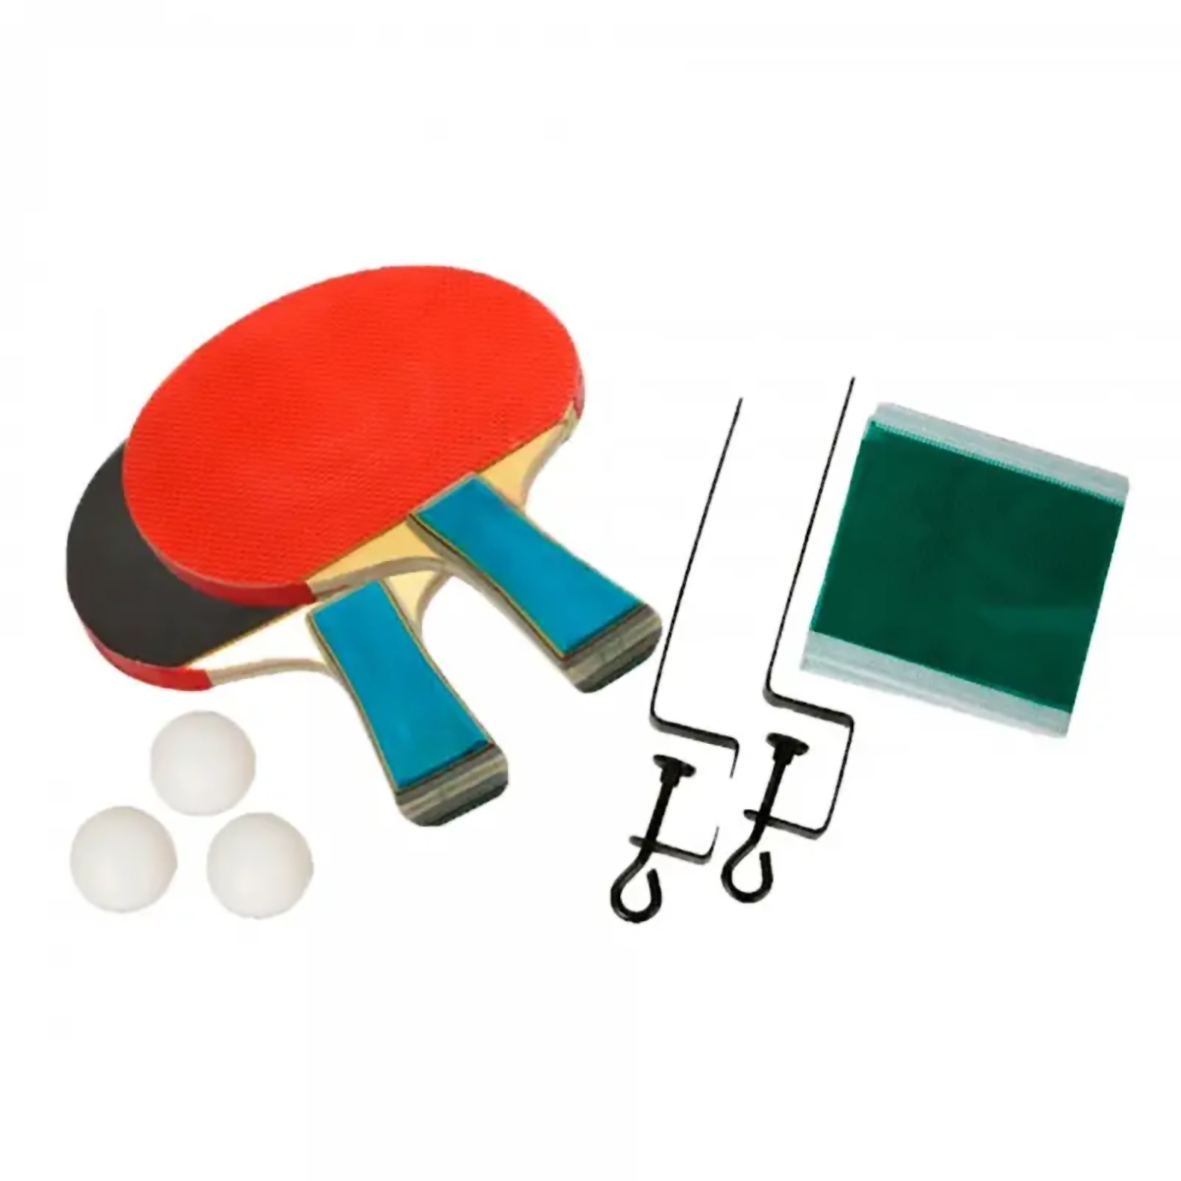 TABLE TENNIS RACKET SET WITH 3 BALLS, STAND AND NET SOFTEE URANUS.